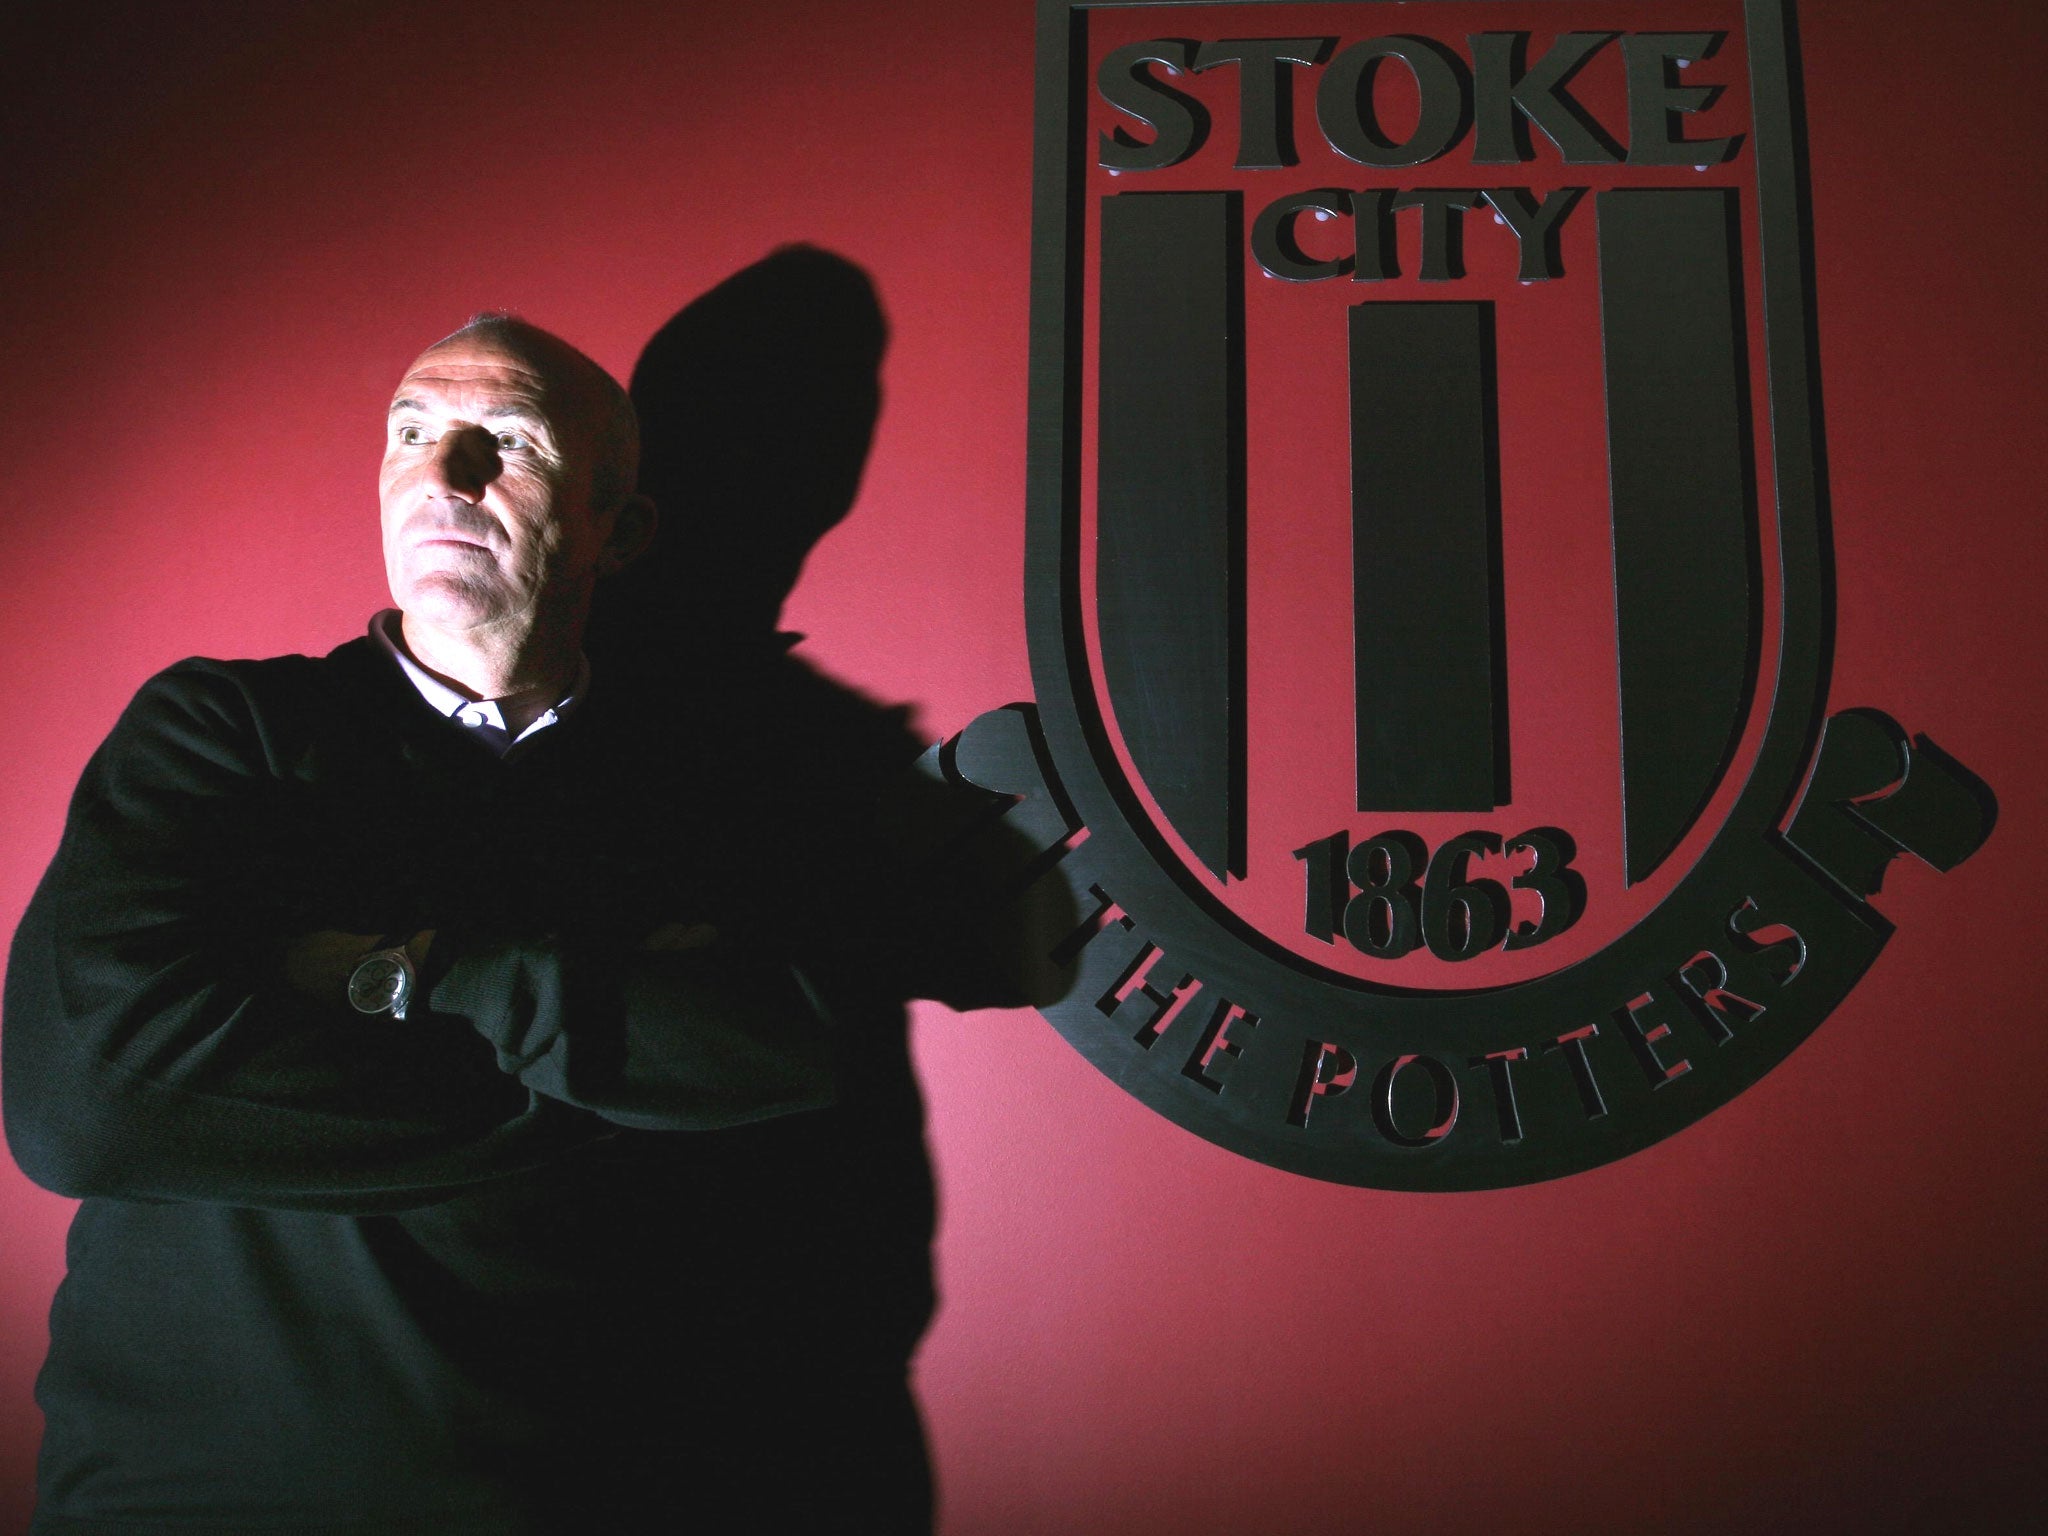 Darkness falls: 'I accept that in life and football you have good times and bad,' says Tony Pulis. 'Adversity is when you show your character'